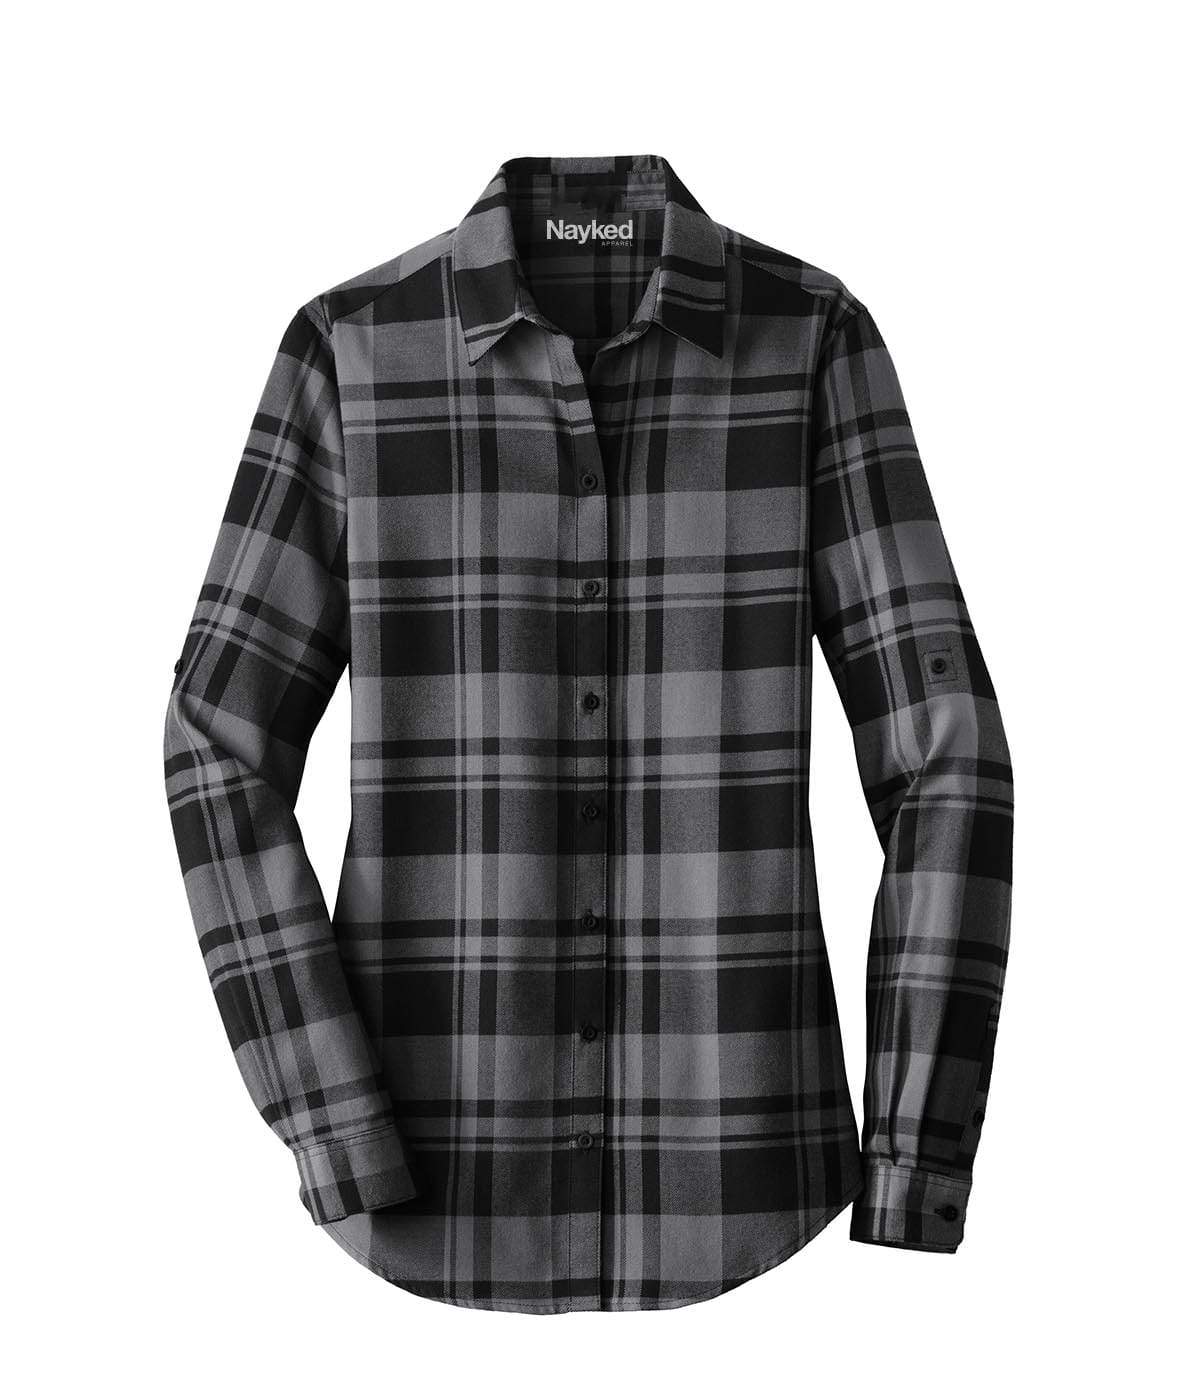 Nayked Apparel Women Women's Ridiculously Soft Plaid Flannel Tunic Shirt